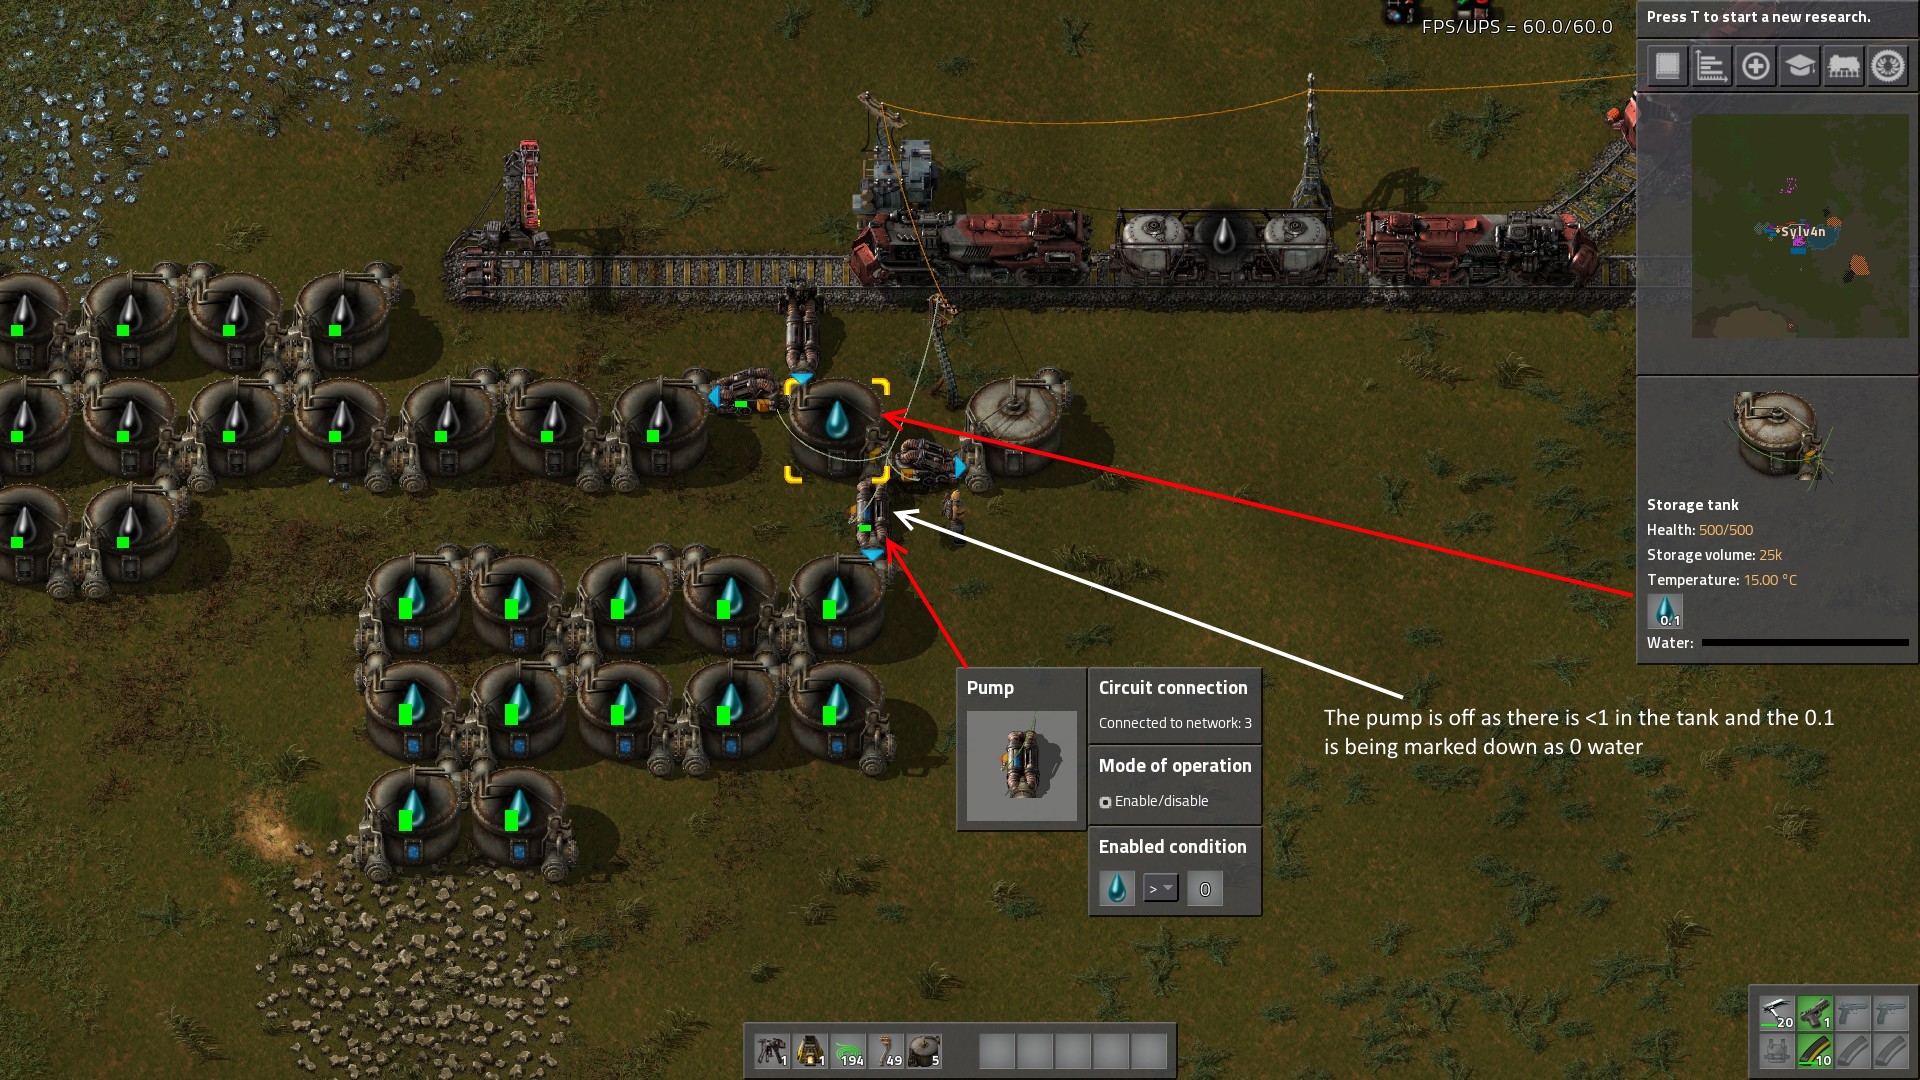 Moved Oil train, its not left in tank